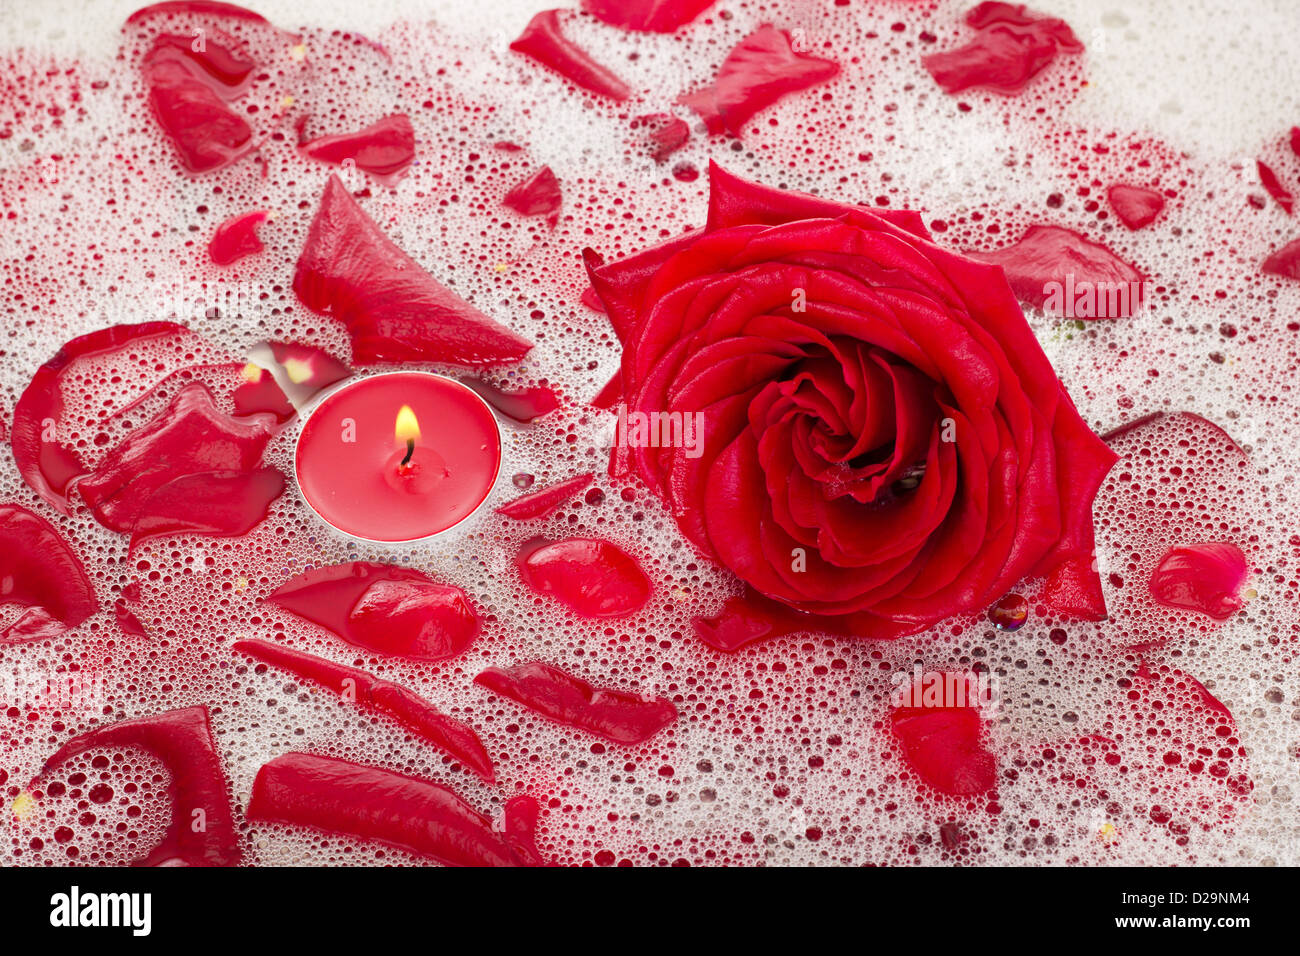 Bath water with rose petals Stock Photo